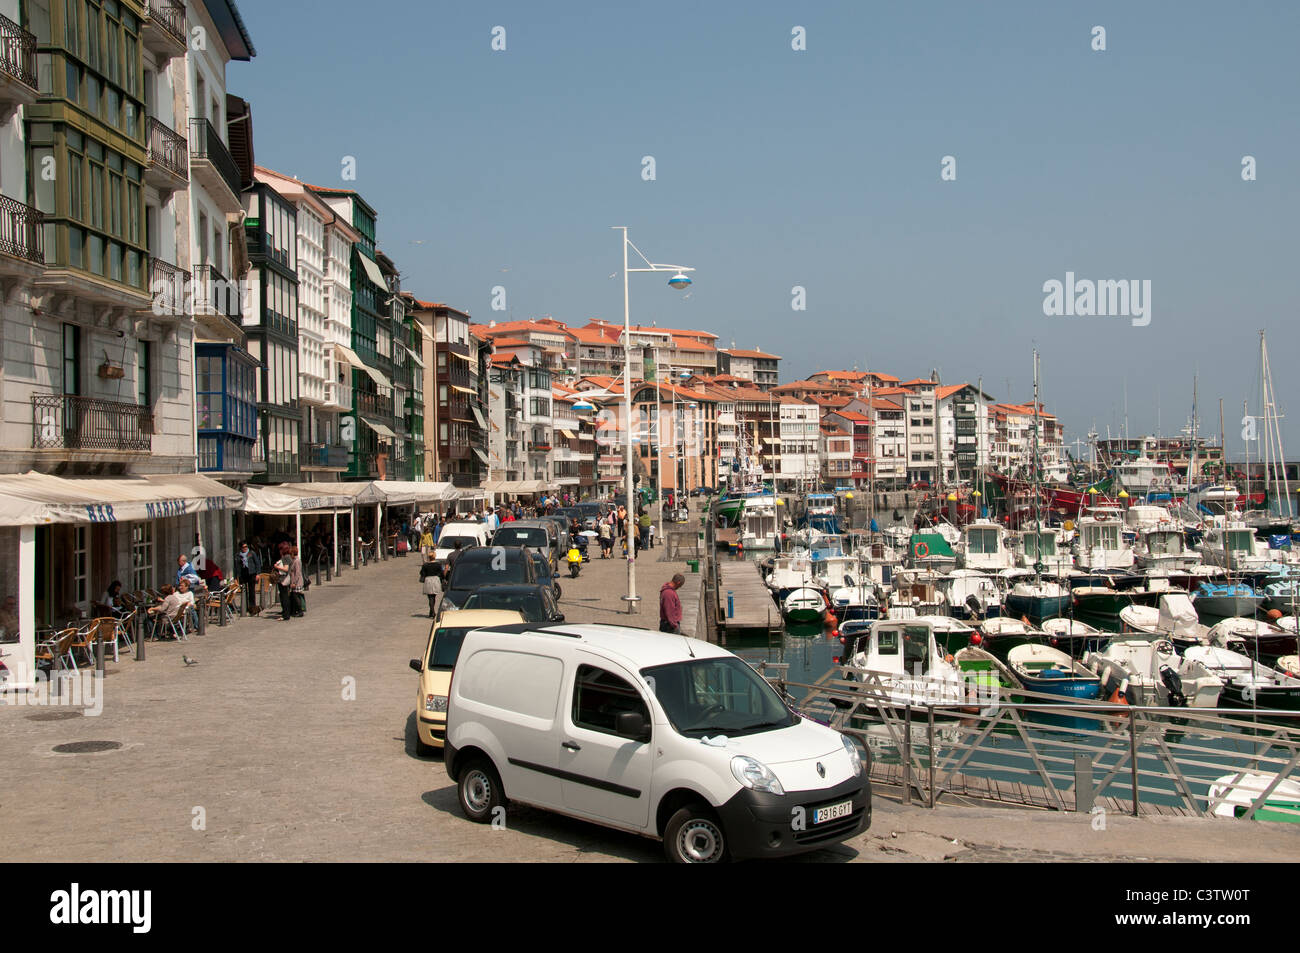 Lekeitio old Fishing Town Biscay Basque Country Spain Stock Photo